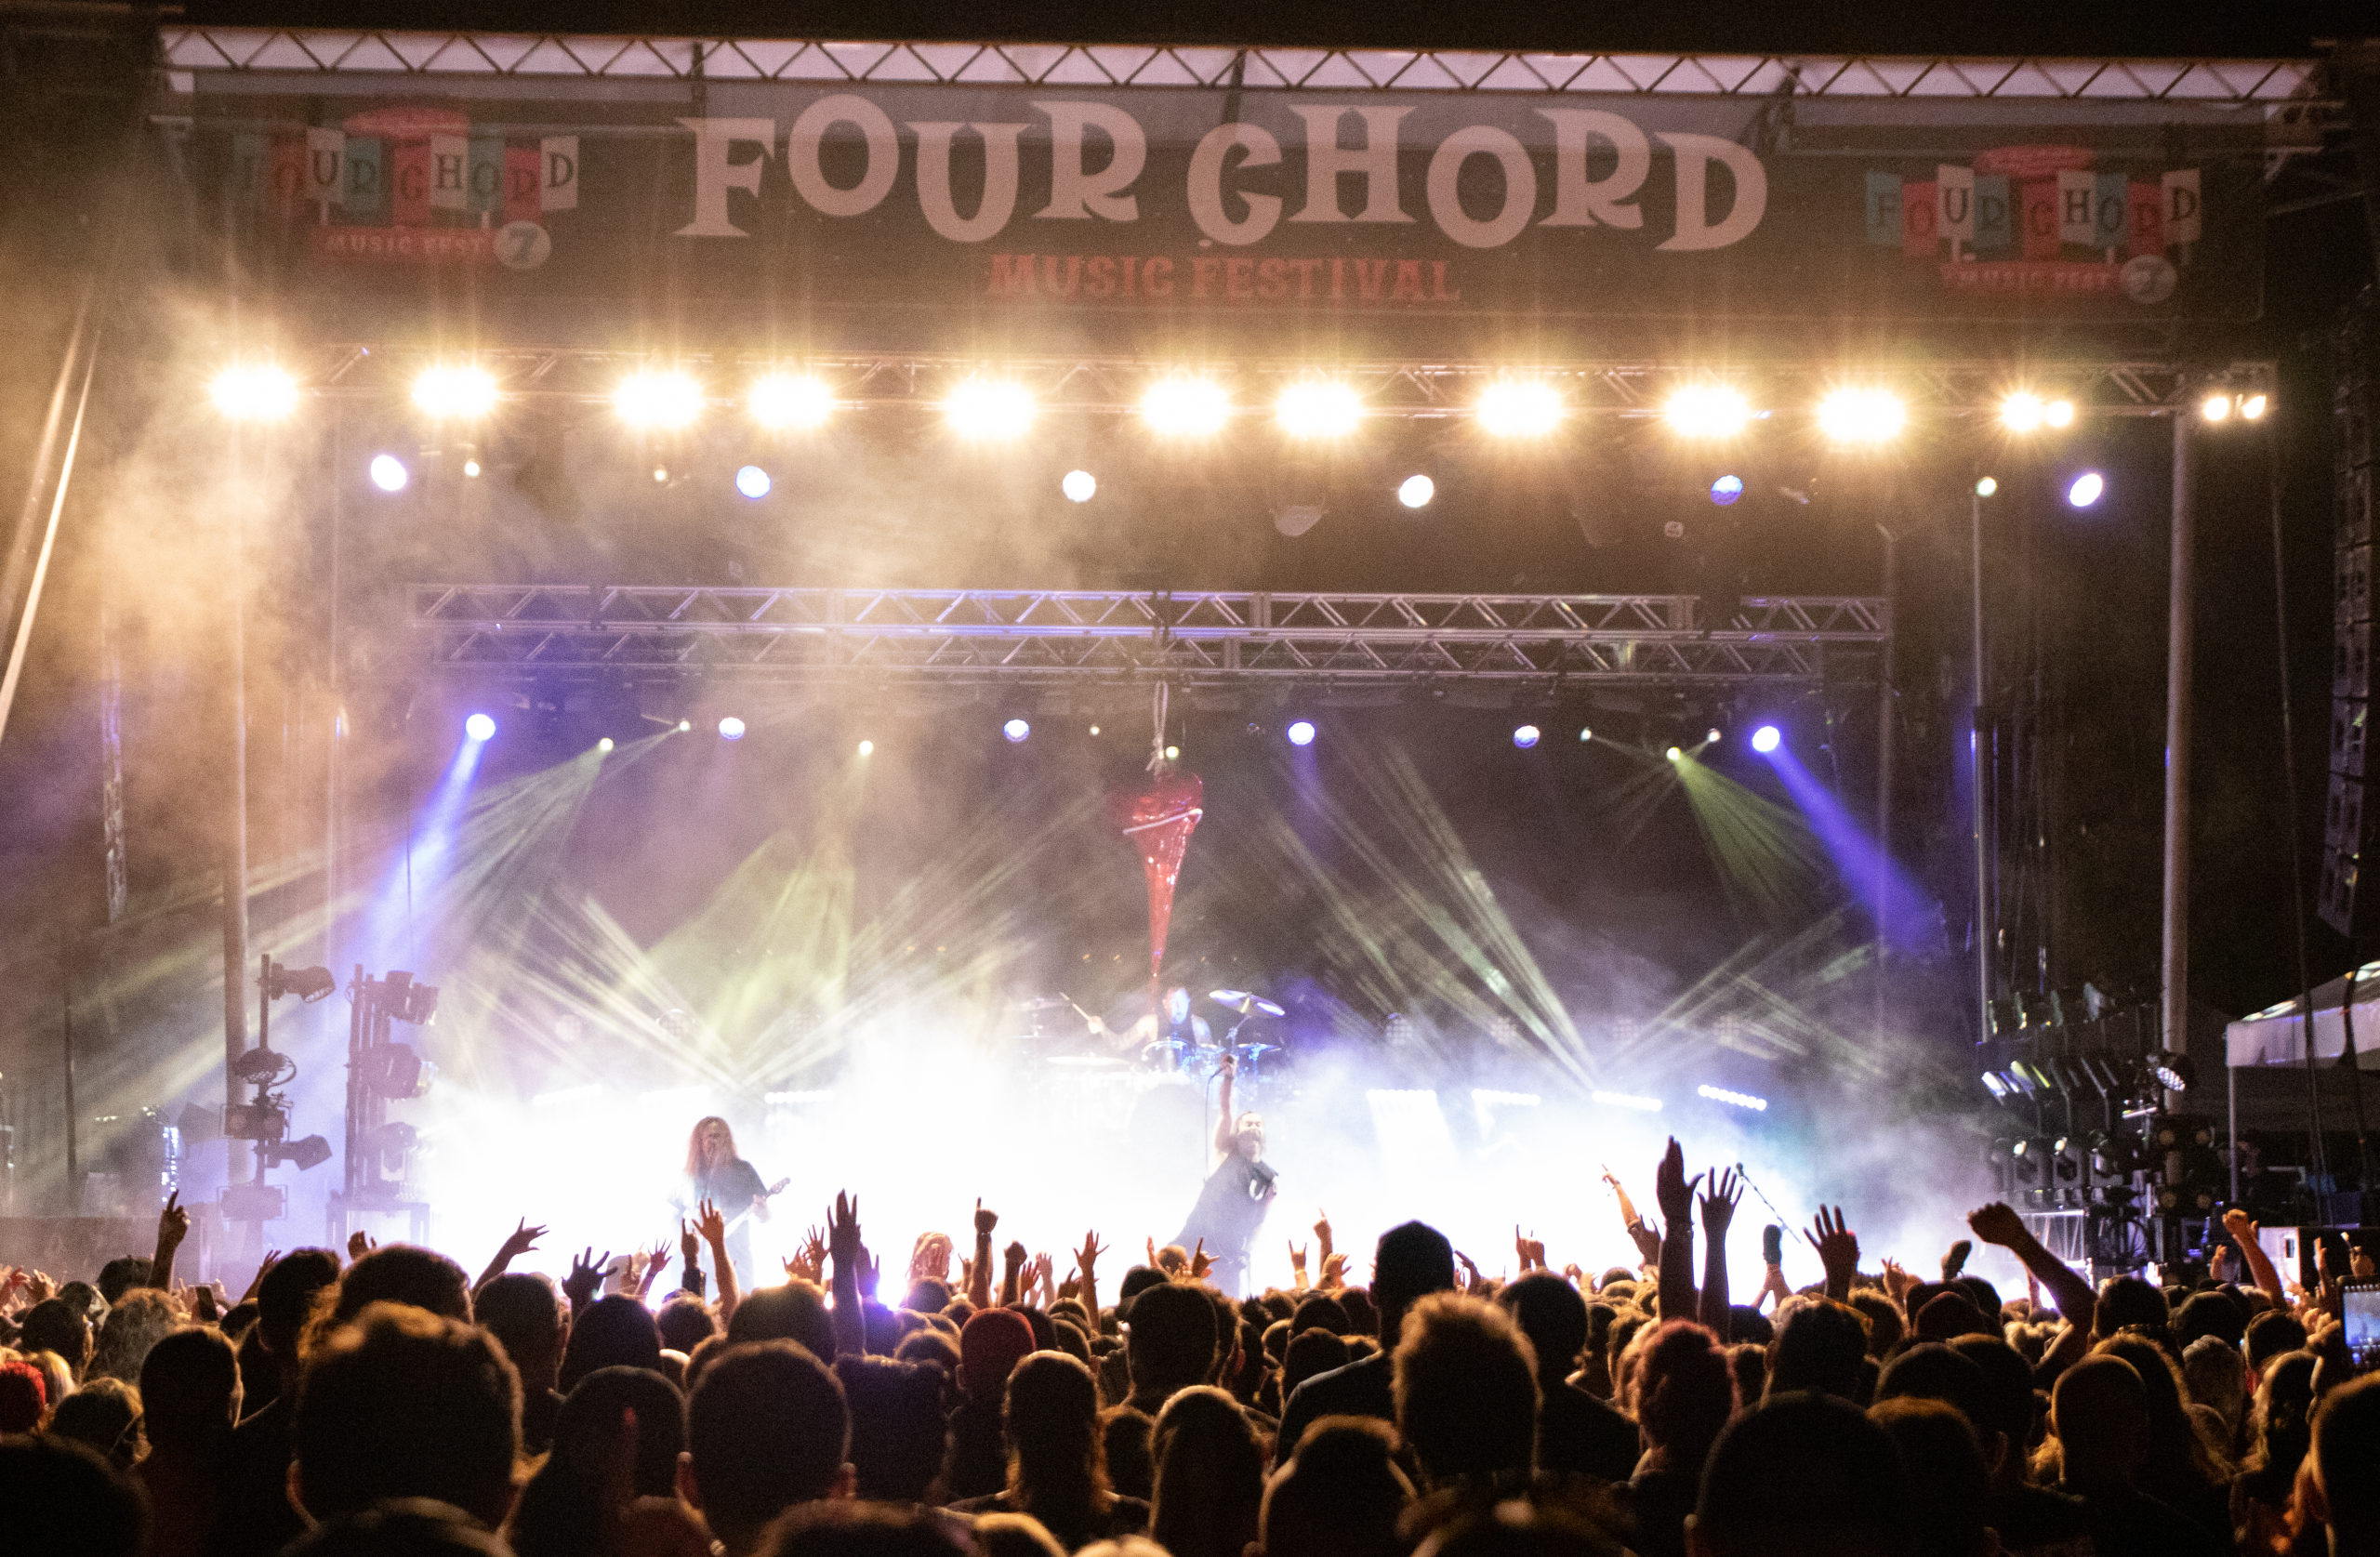 FOUR CHORD MUSIC FESTIVAL RETURNS FOR A 7TH RUN IN PITTSBURGH, PA